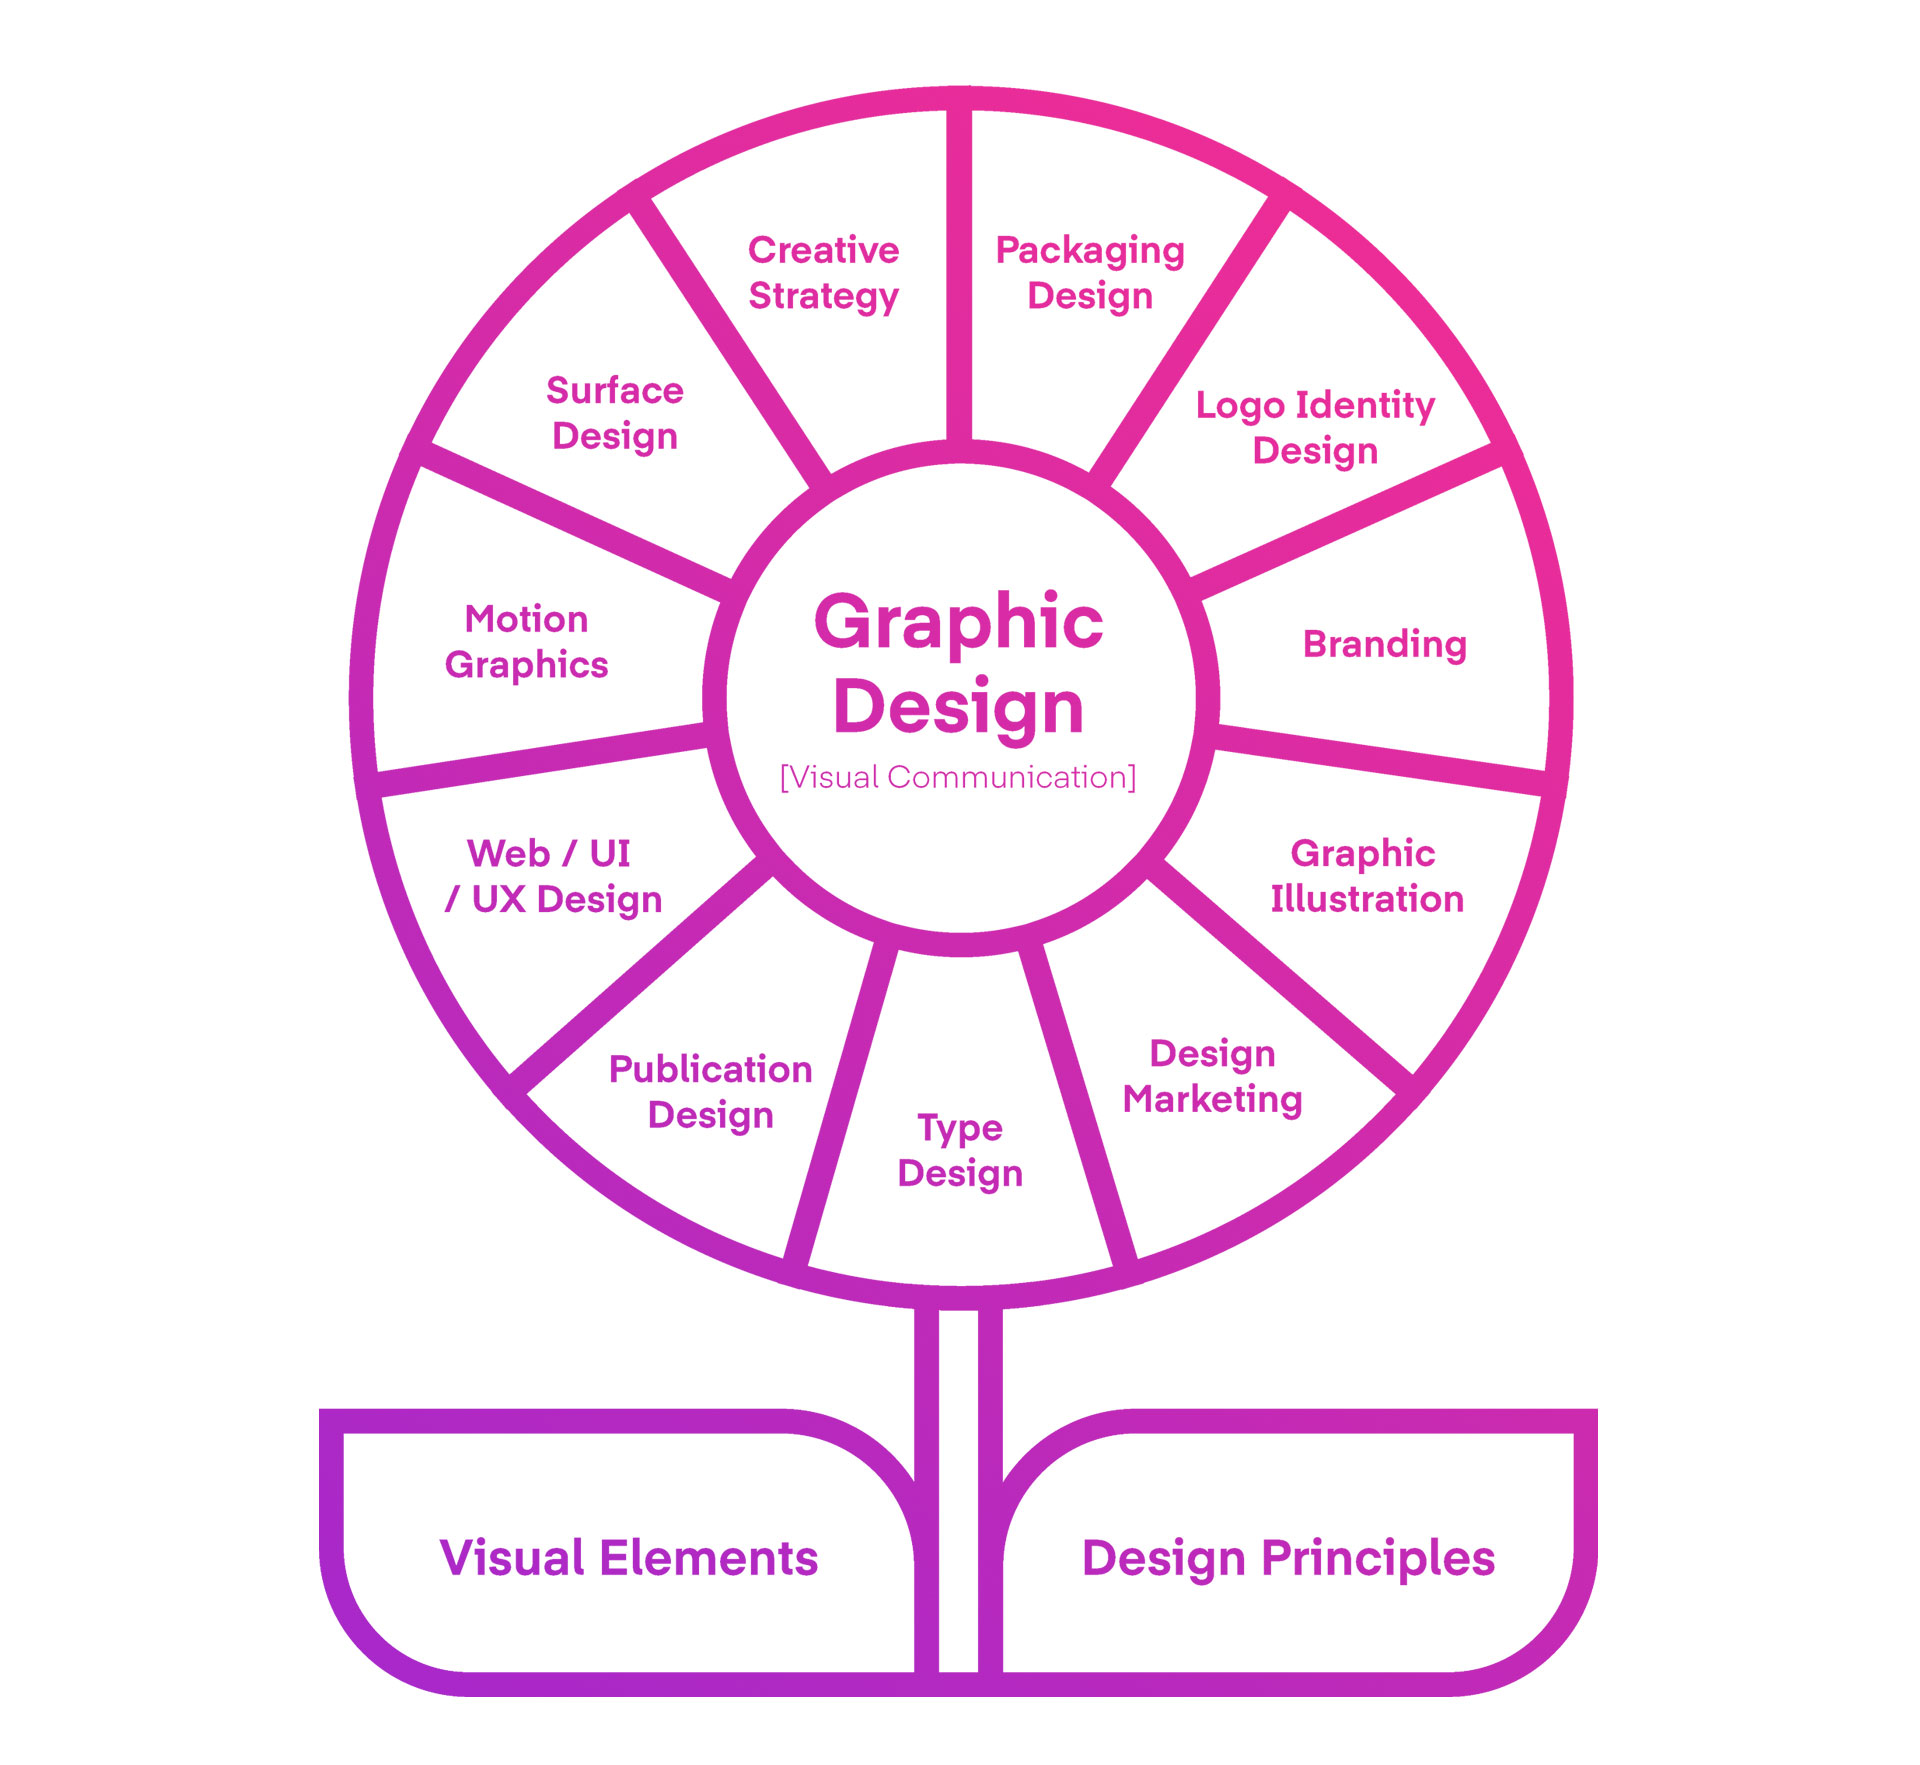 Graphic Design Jobs Explained - Learn About the Key Areas in The Design